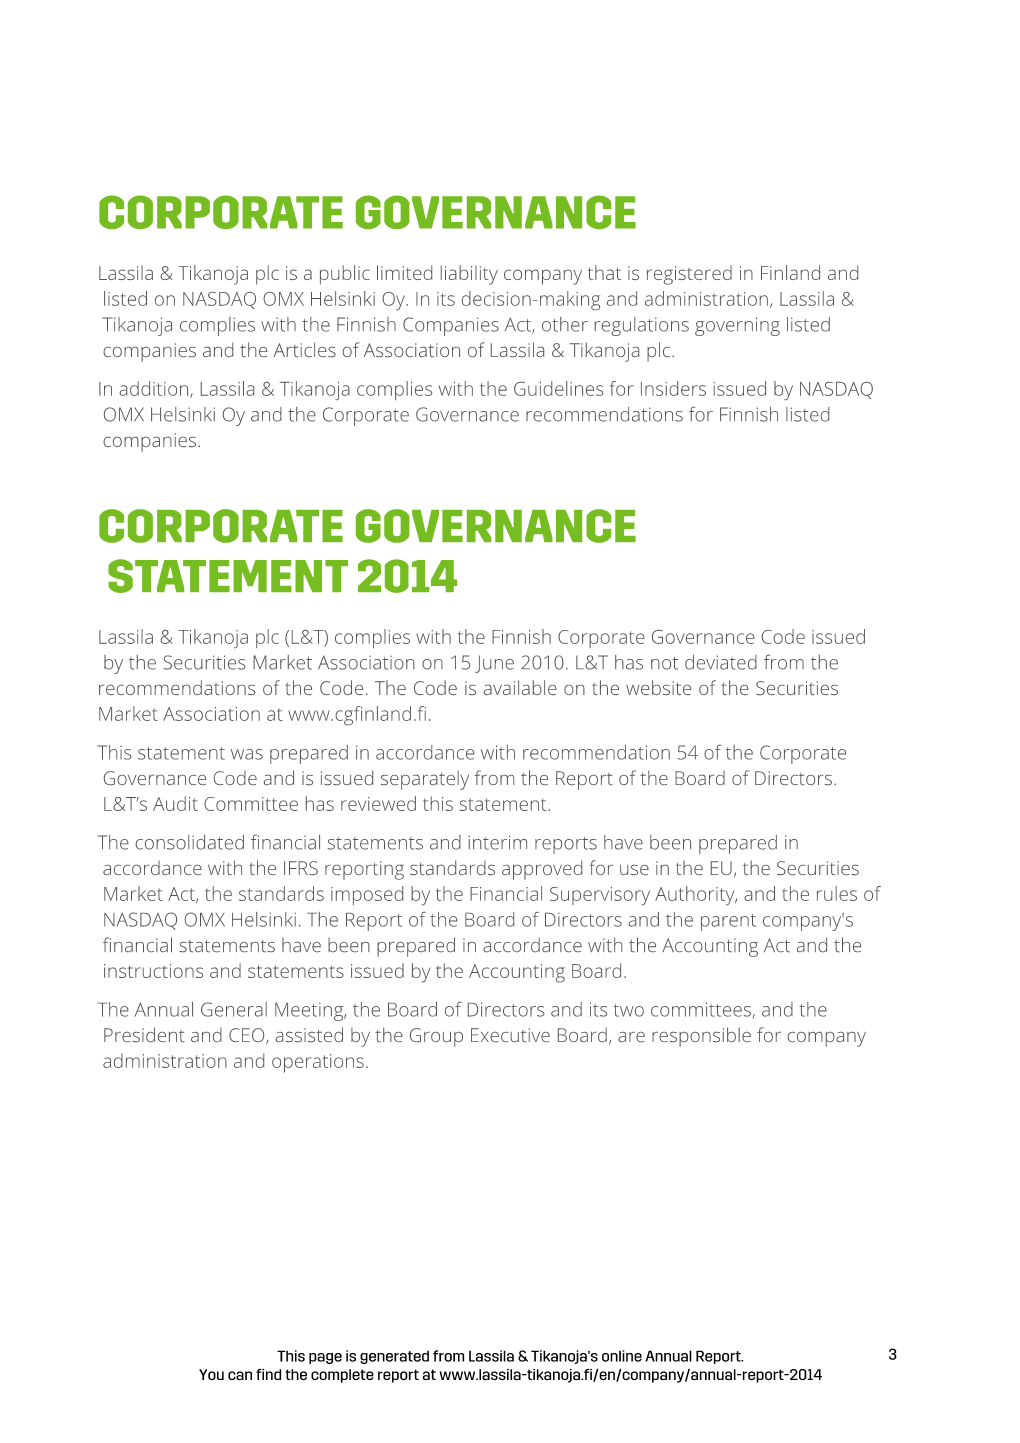 L&T Financial Statements and Corporate Governance 2014